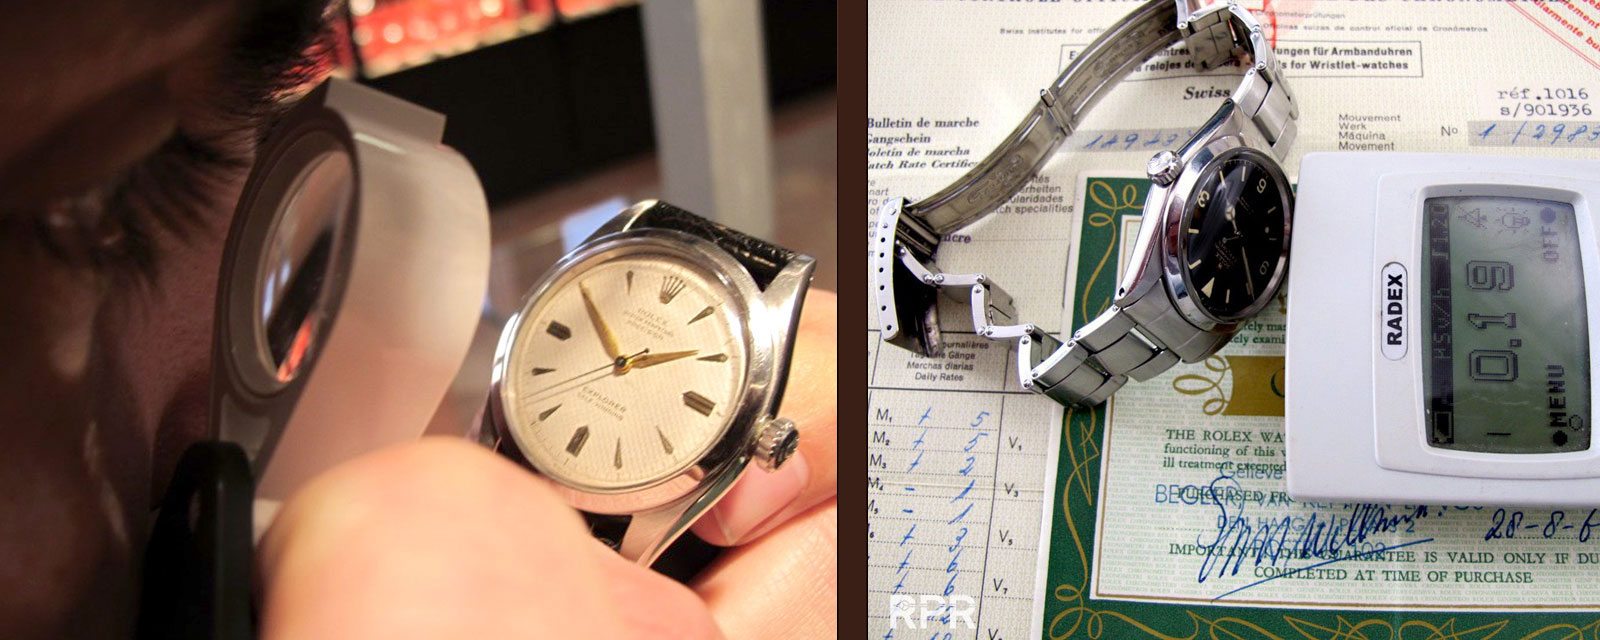 how to value a rolex watch